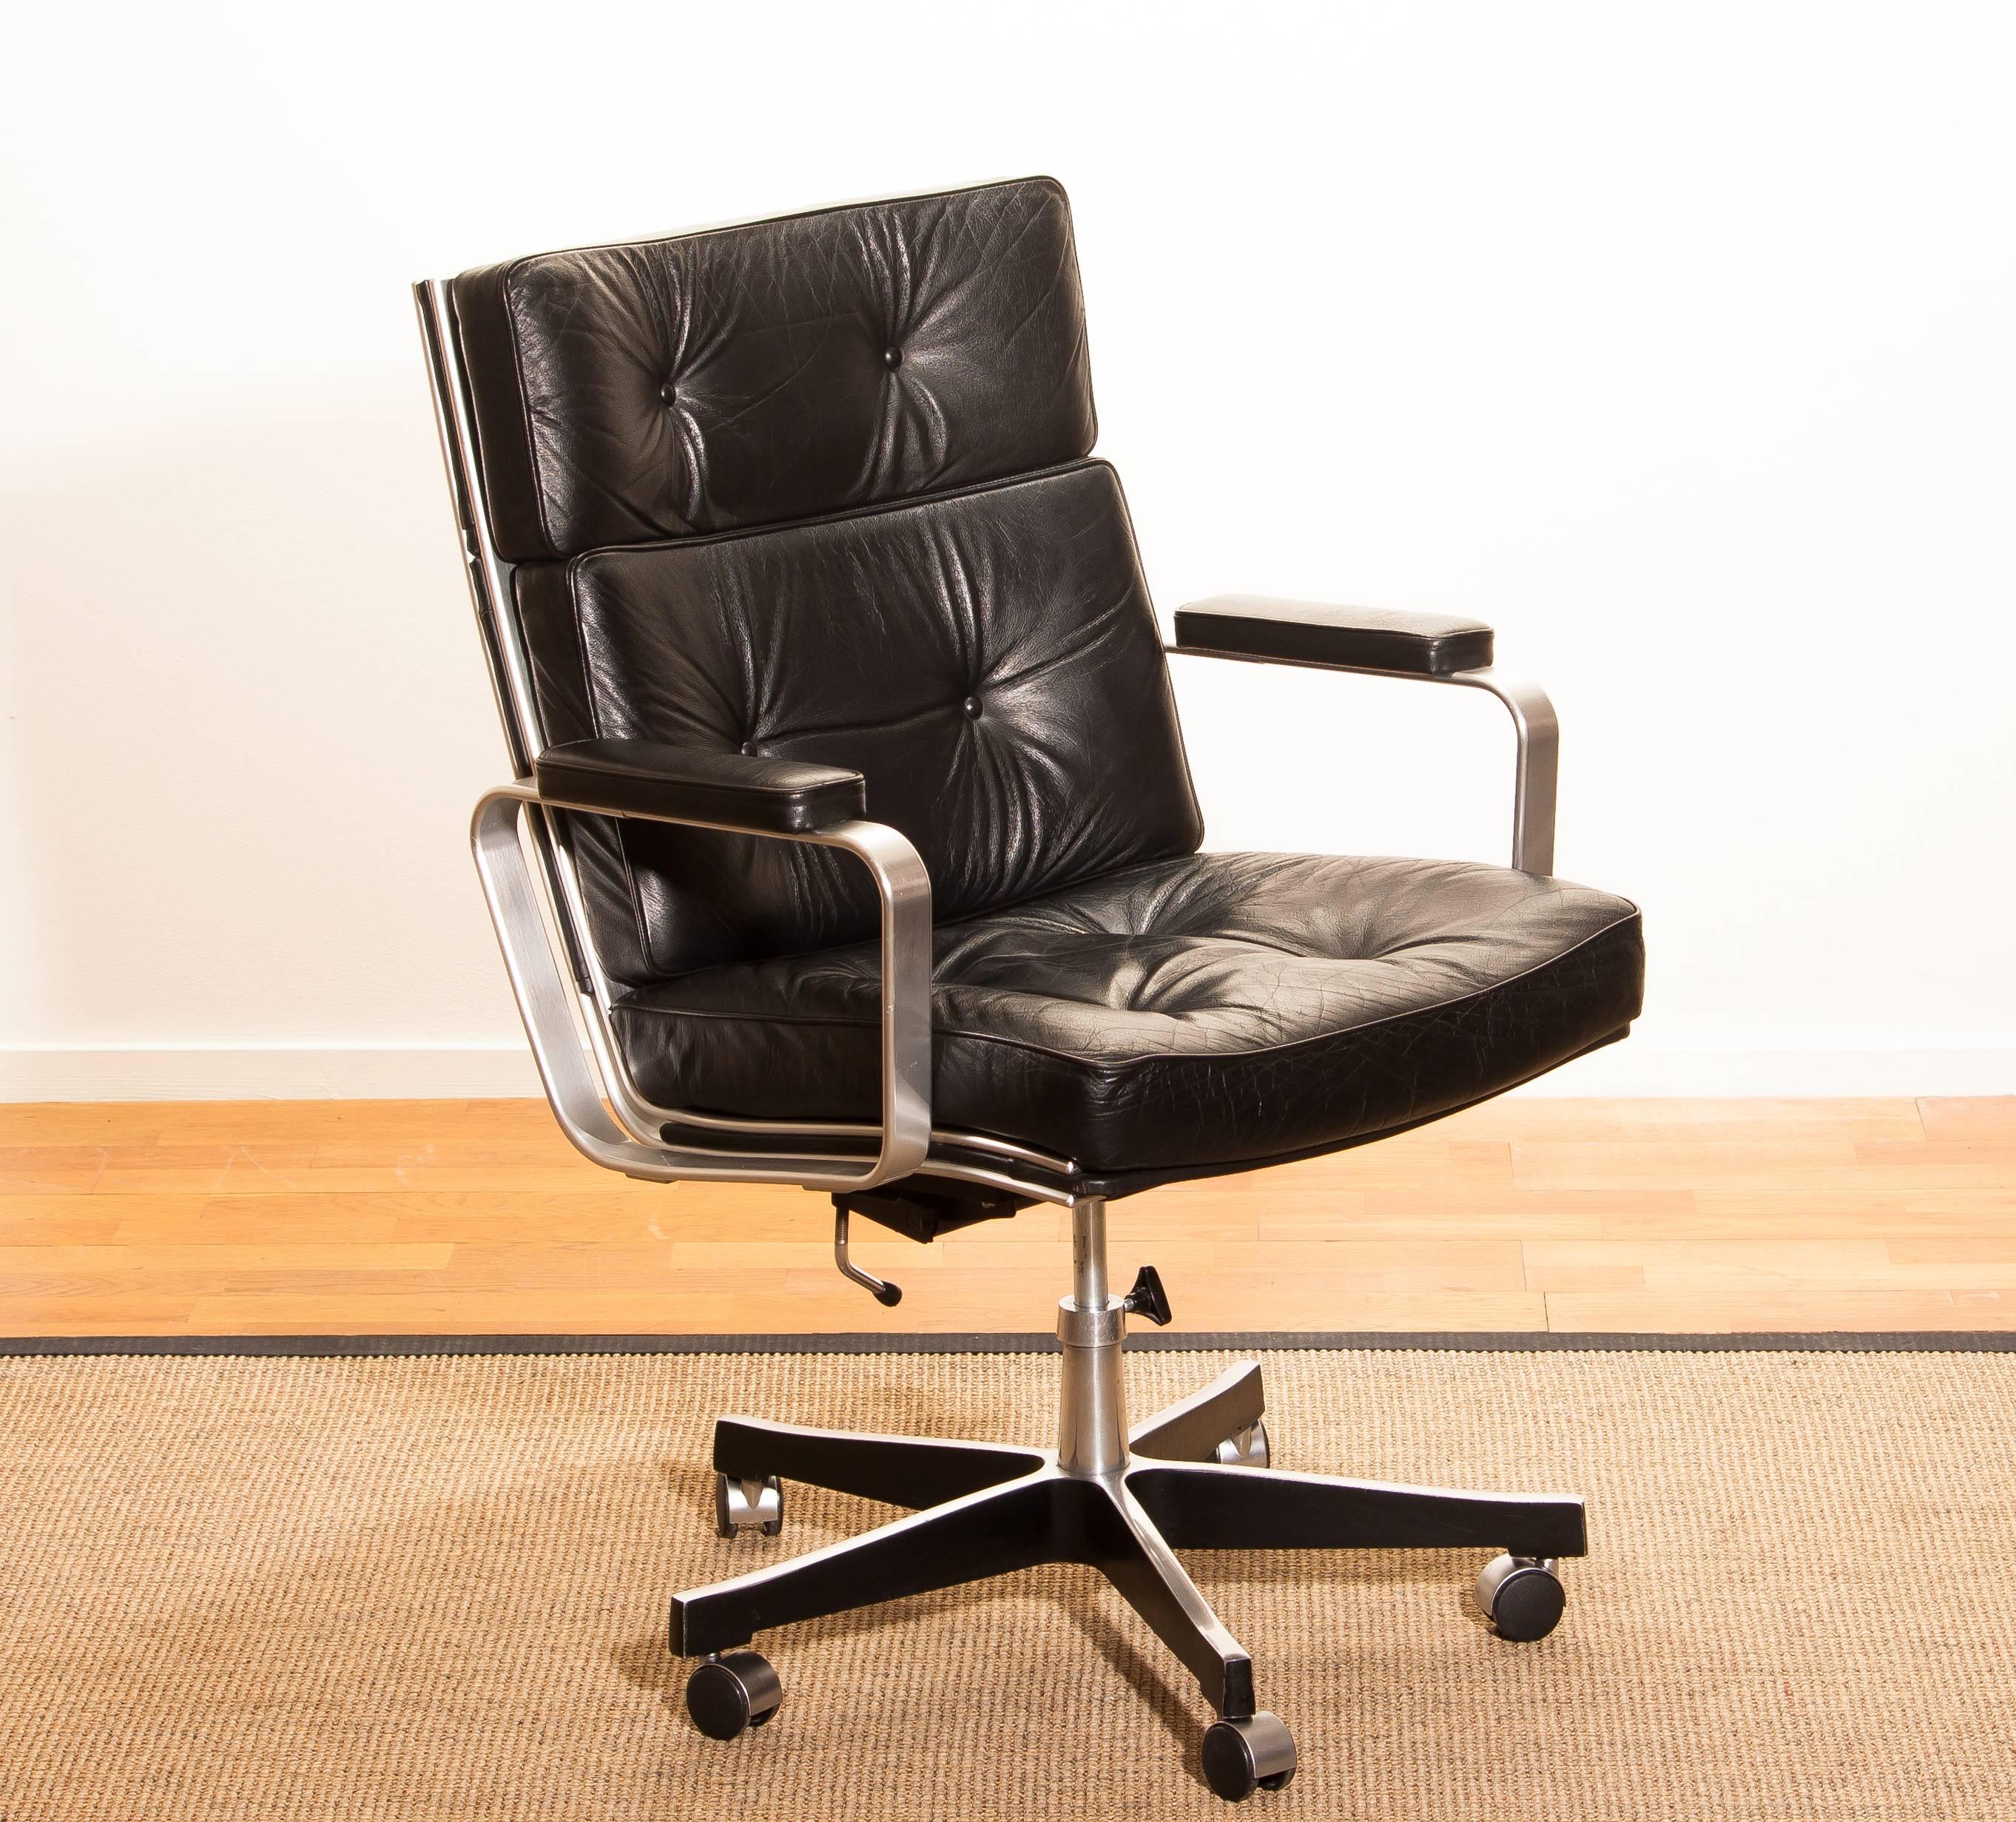 Beautiful adjustable office chair designed by Karl Erik Ekselius for JOC Möbler.
The nice thick solid black leather with an aluminium frame and steel five legs on wheels is a perfect combination.
The chair is extremely comfortable. 
With minimal